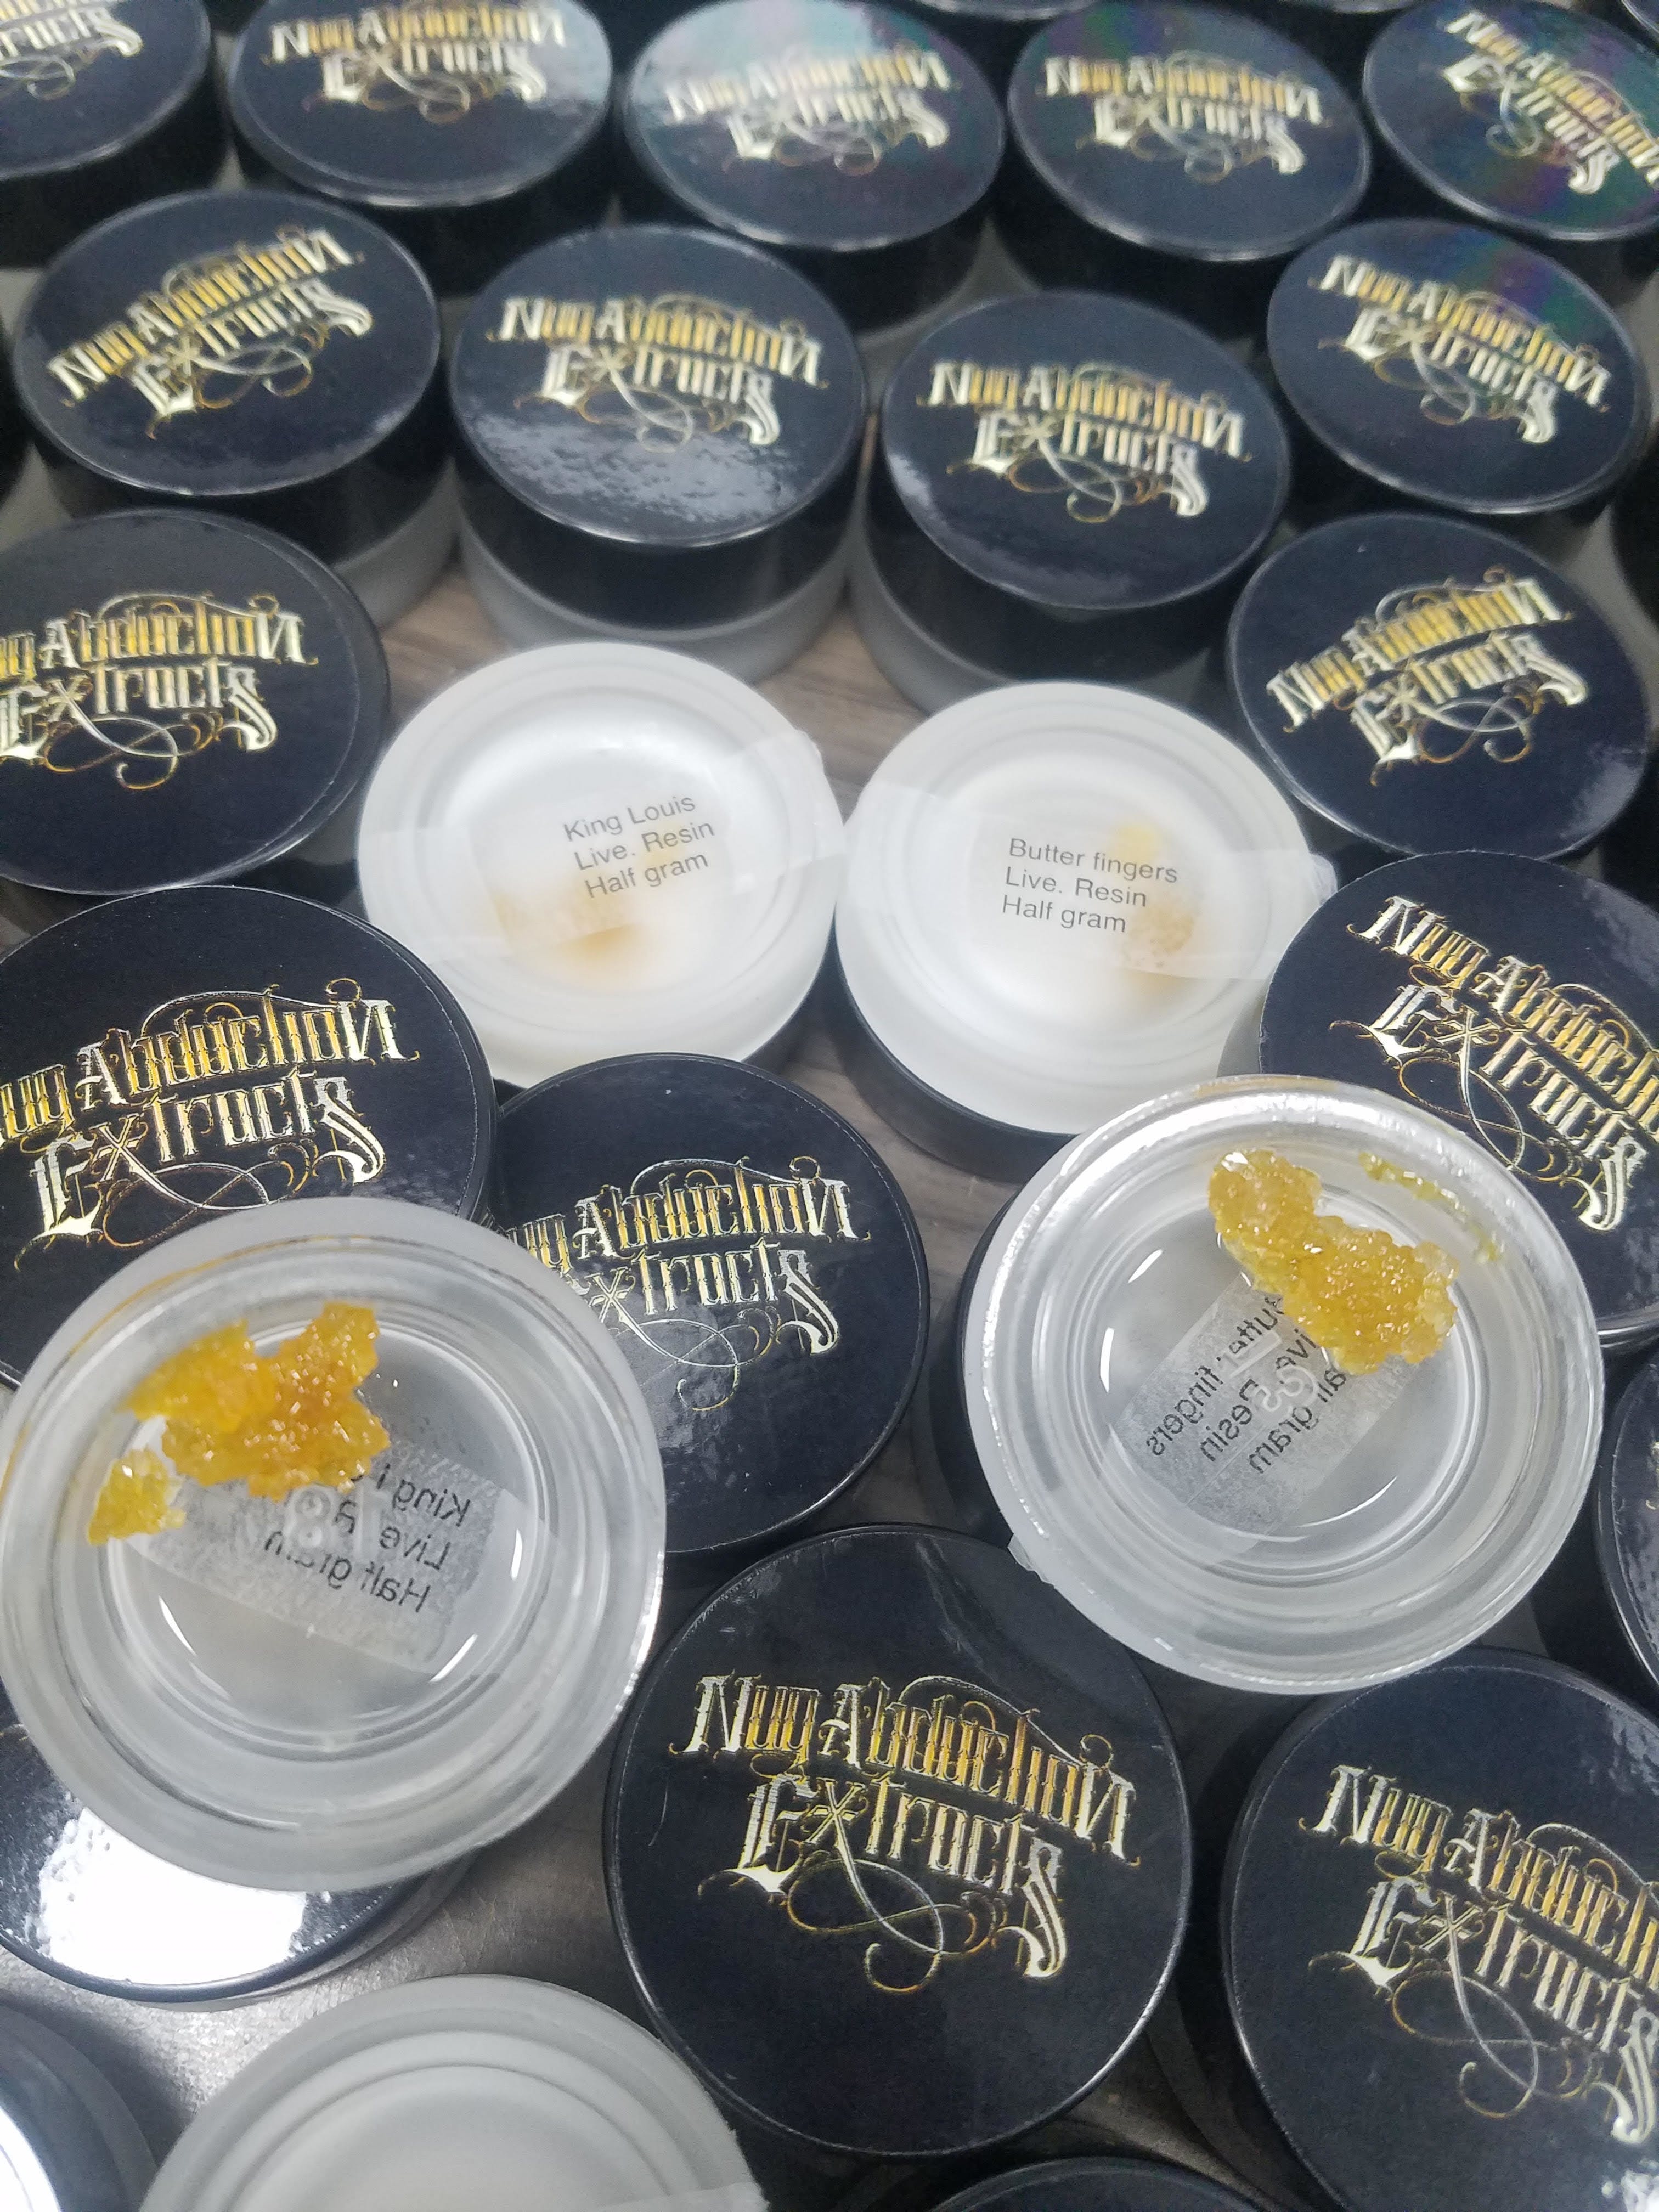 concentrate-nug-abduction-extracts-live-resin